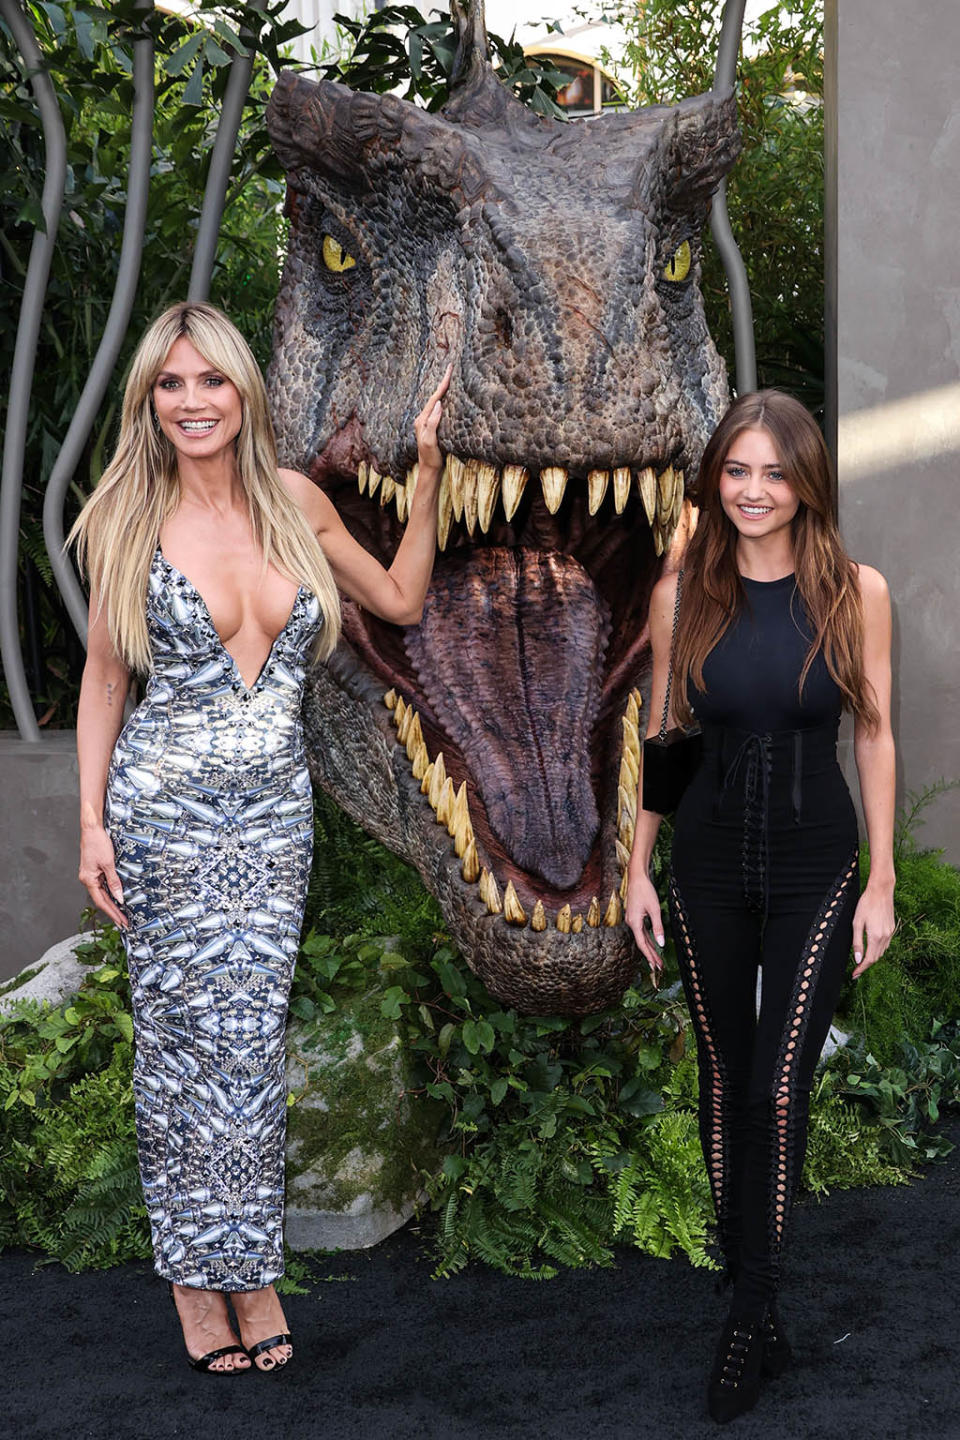 (L-R) Heidi Klum and her daughter Leni Klum at the premiere of ‘Jurassic World: Dominion’ at the TCL Theatre in Los Angeles on June 6, 2022. - Credit: Xavier Collin/Image Press Agency